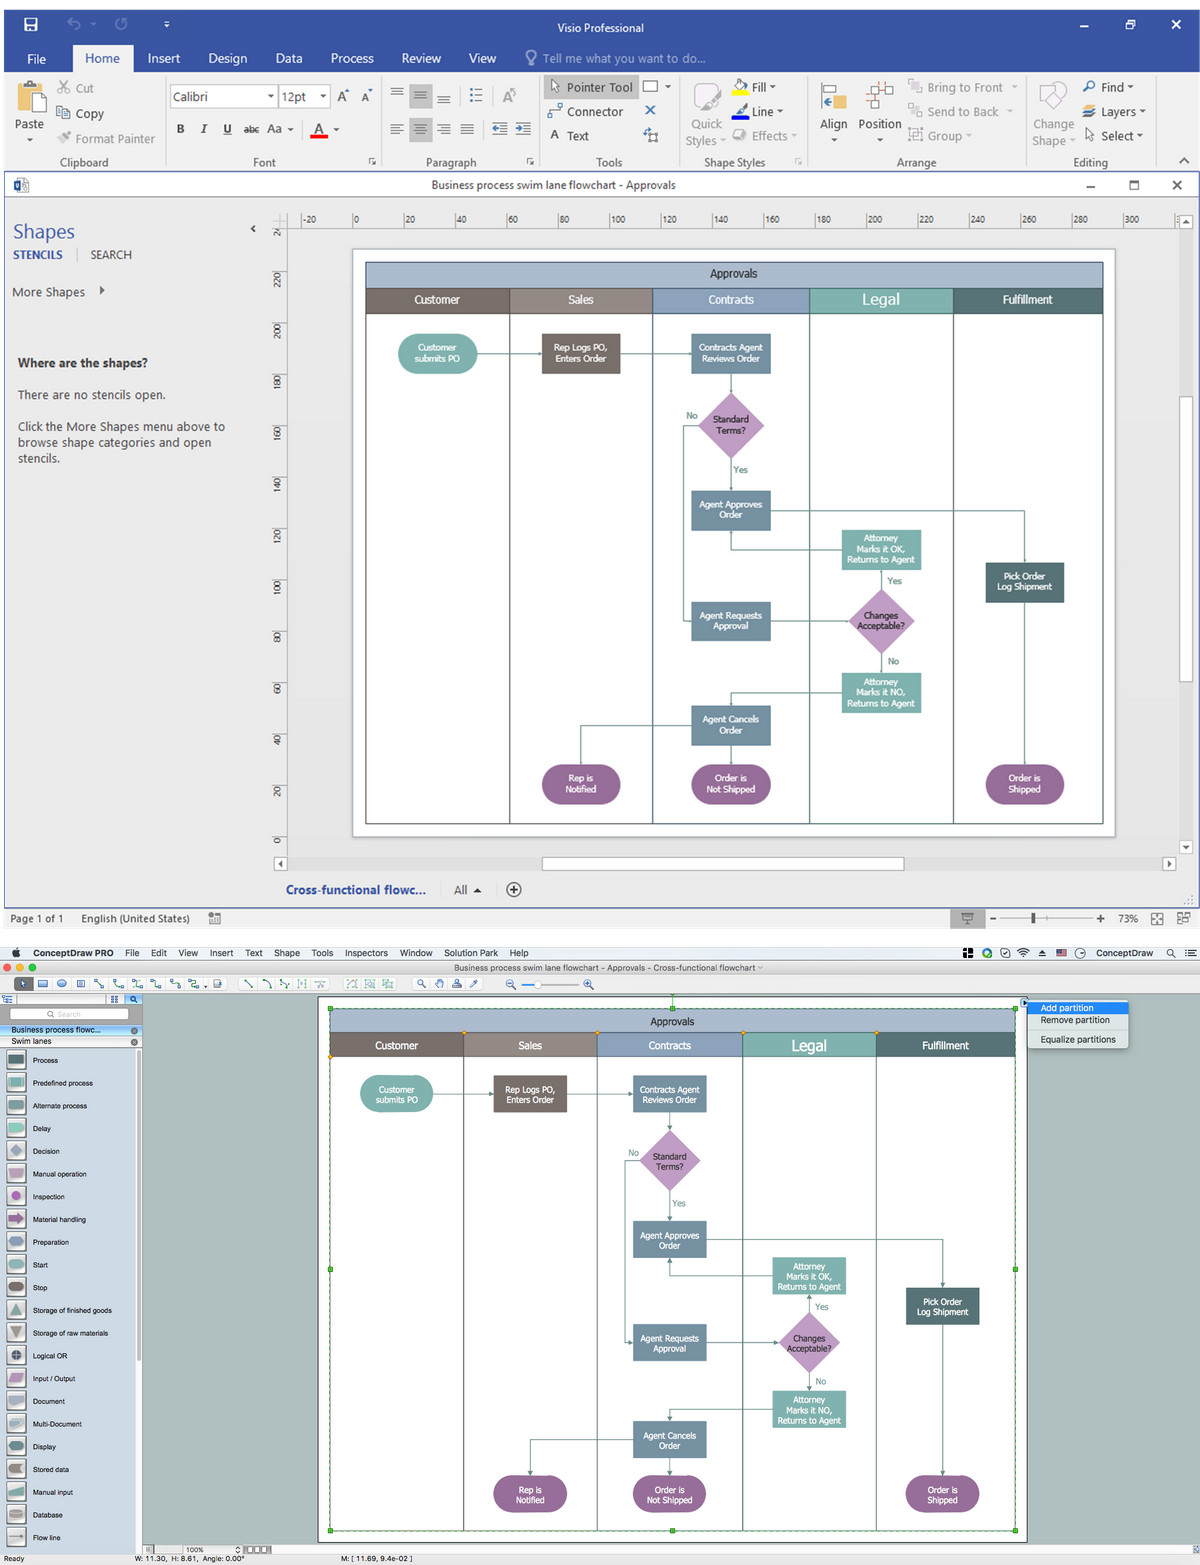 Visio Files and ConceptDraw